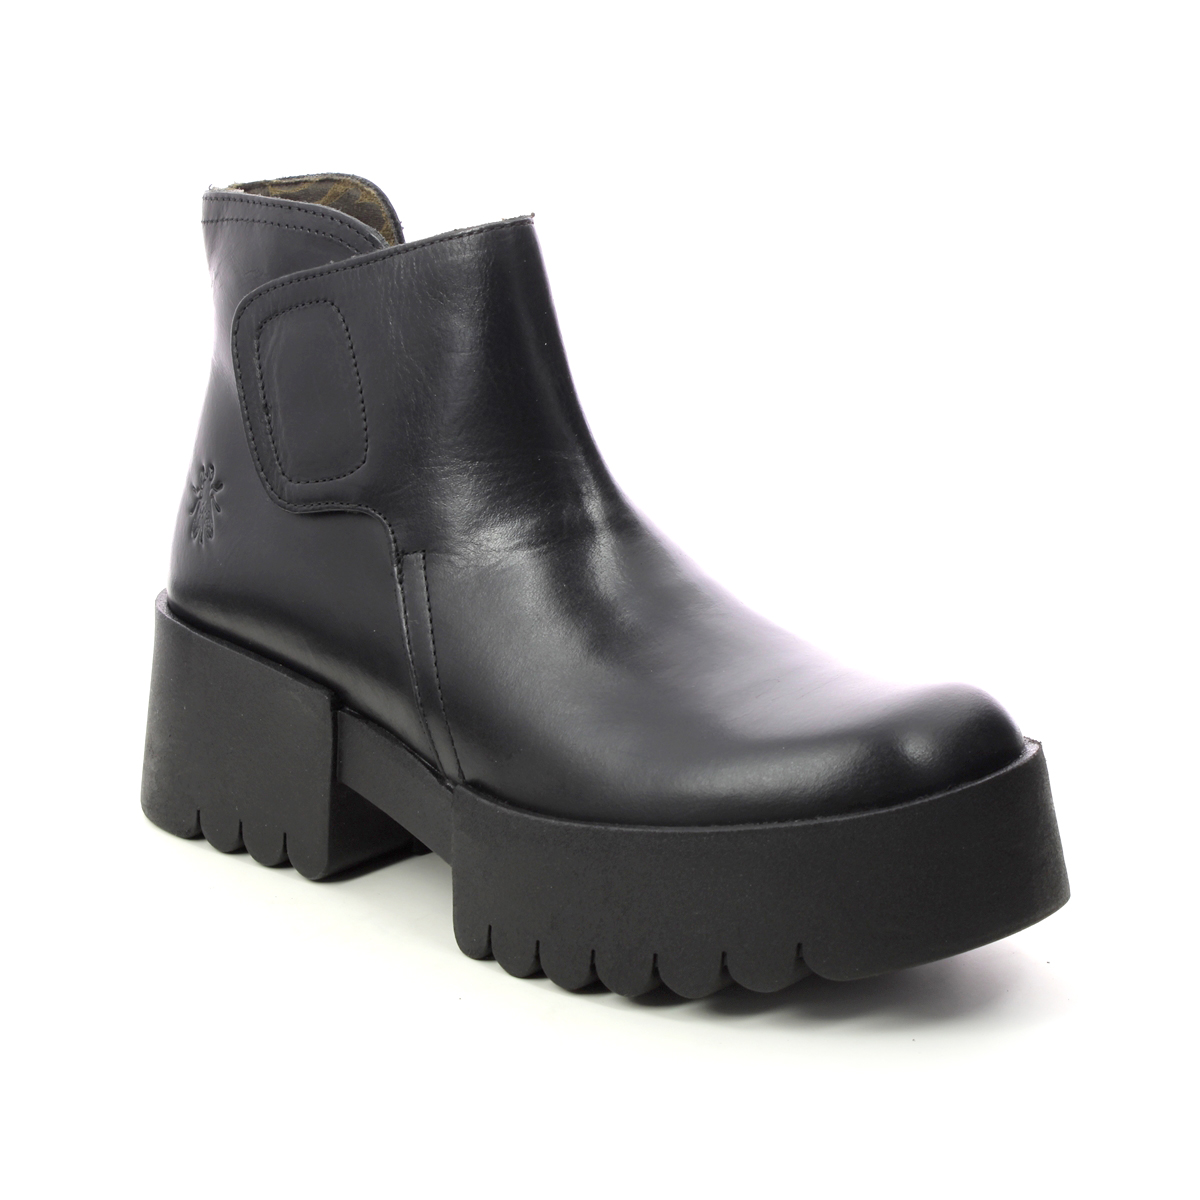 Fly London Endo   Esme Black Leather Womens Wedge Boots P145006 In Size 38 In Plain Black Leather